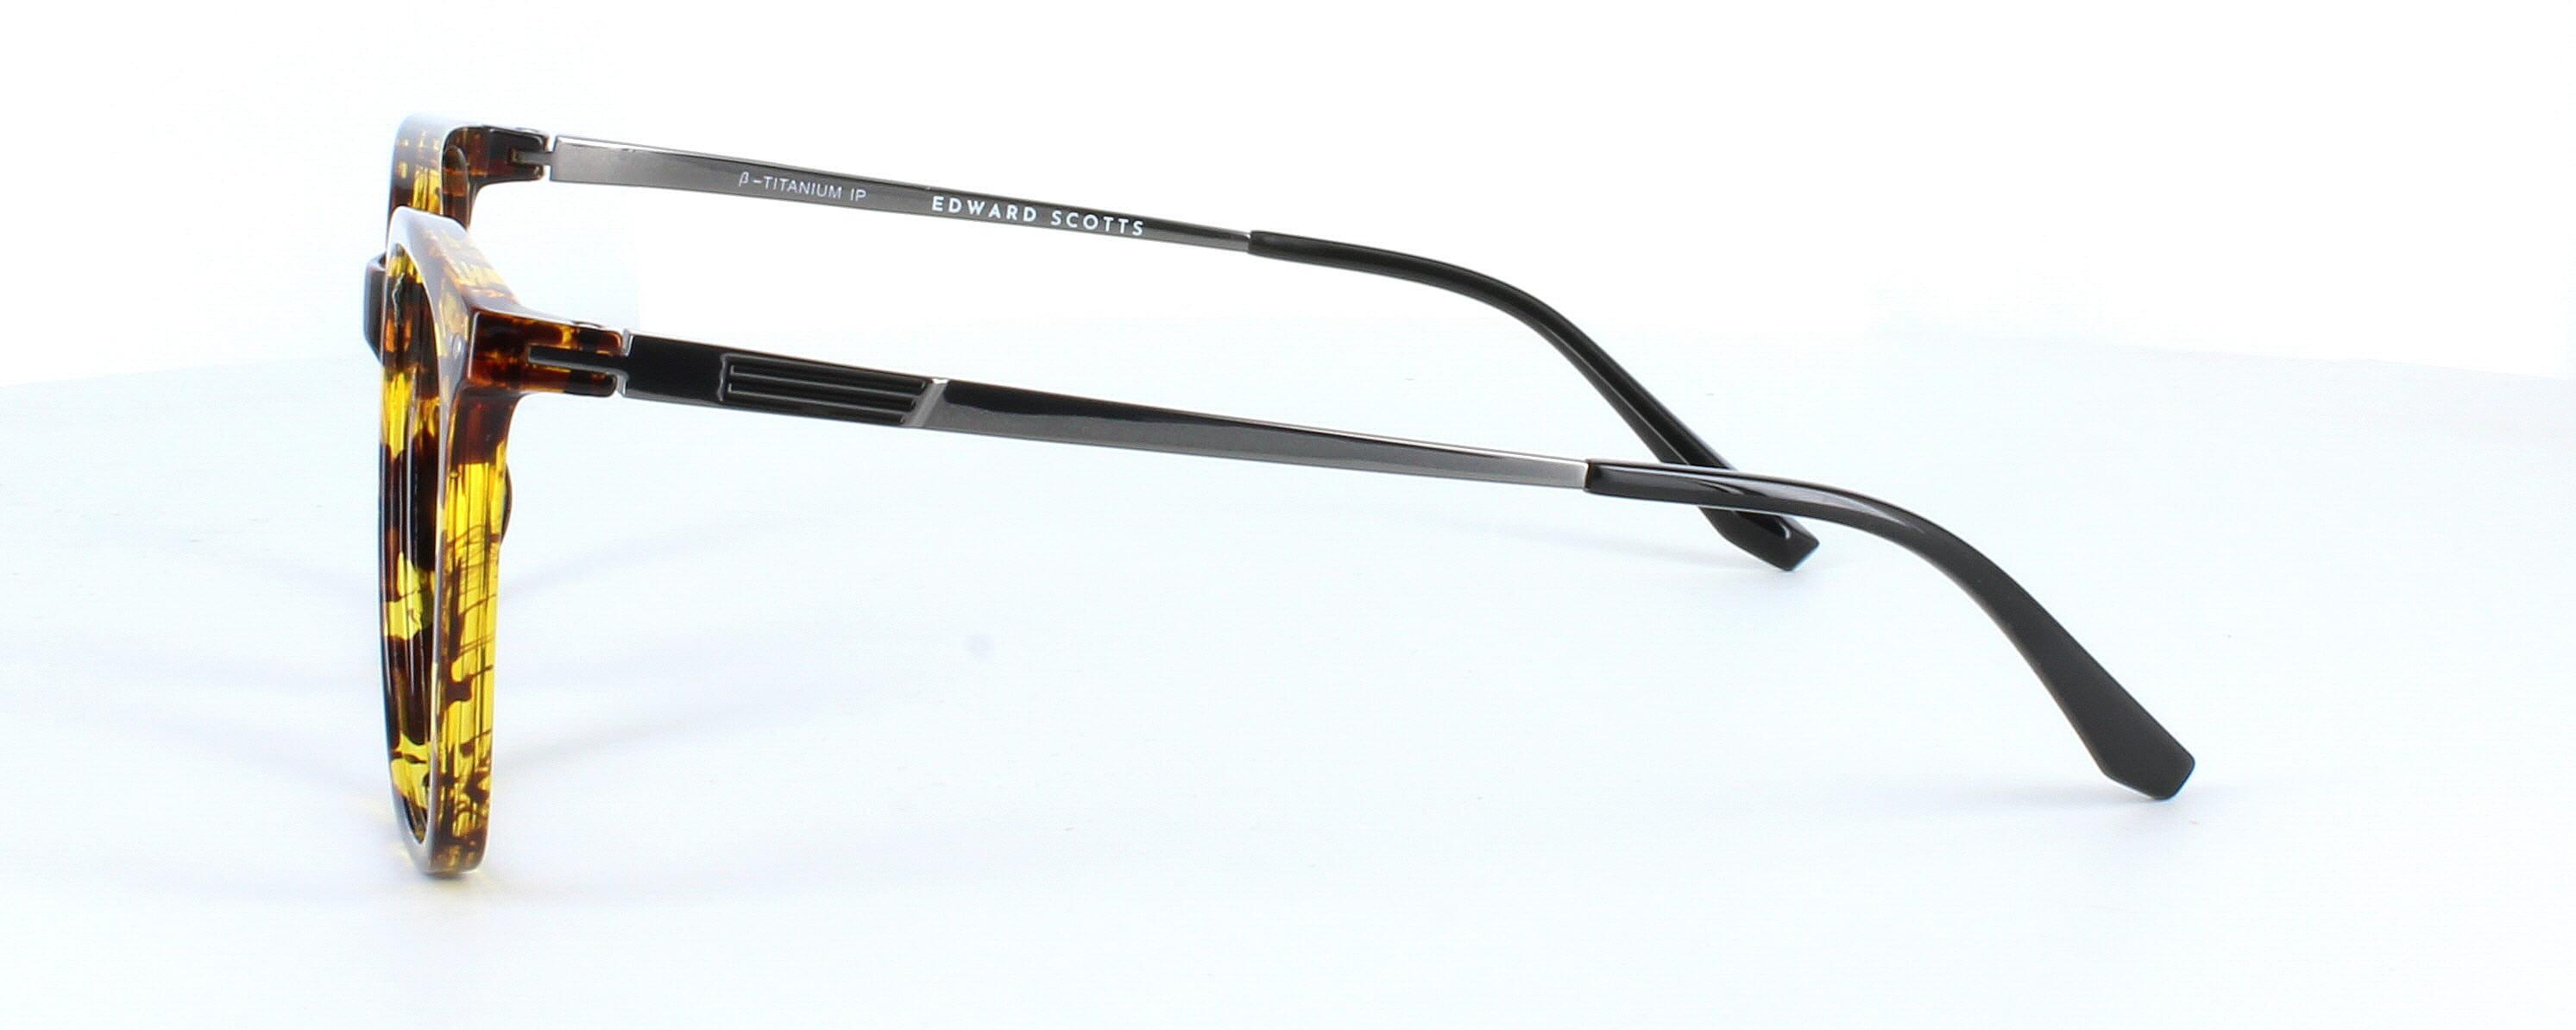 Edward Scotts ST6202 - Tortoise - Gent's acetate frame with square shaped lenses with silver titanium arms - image view 3